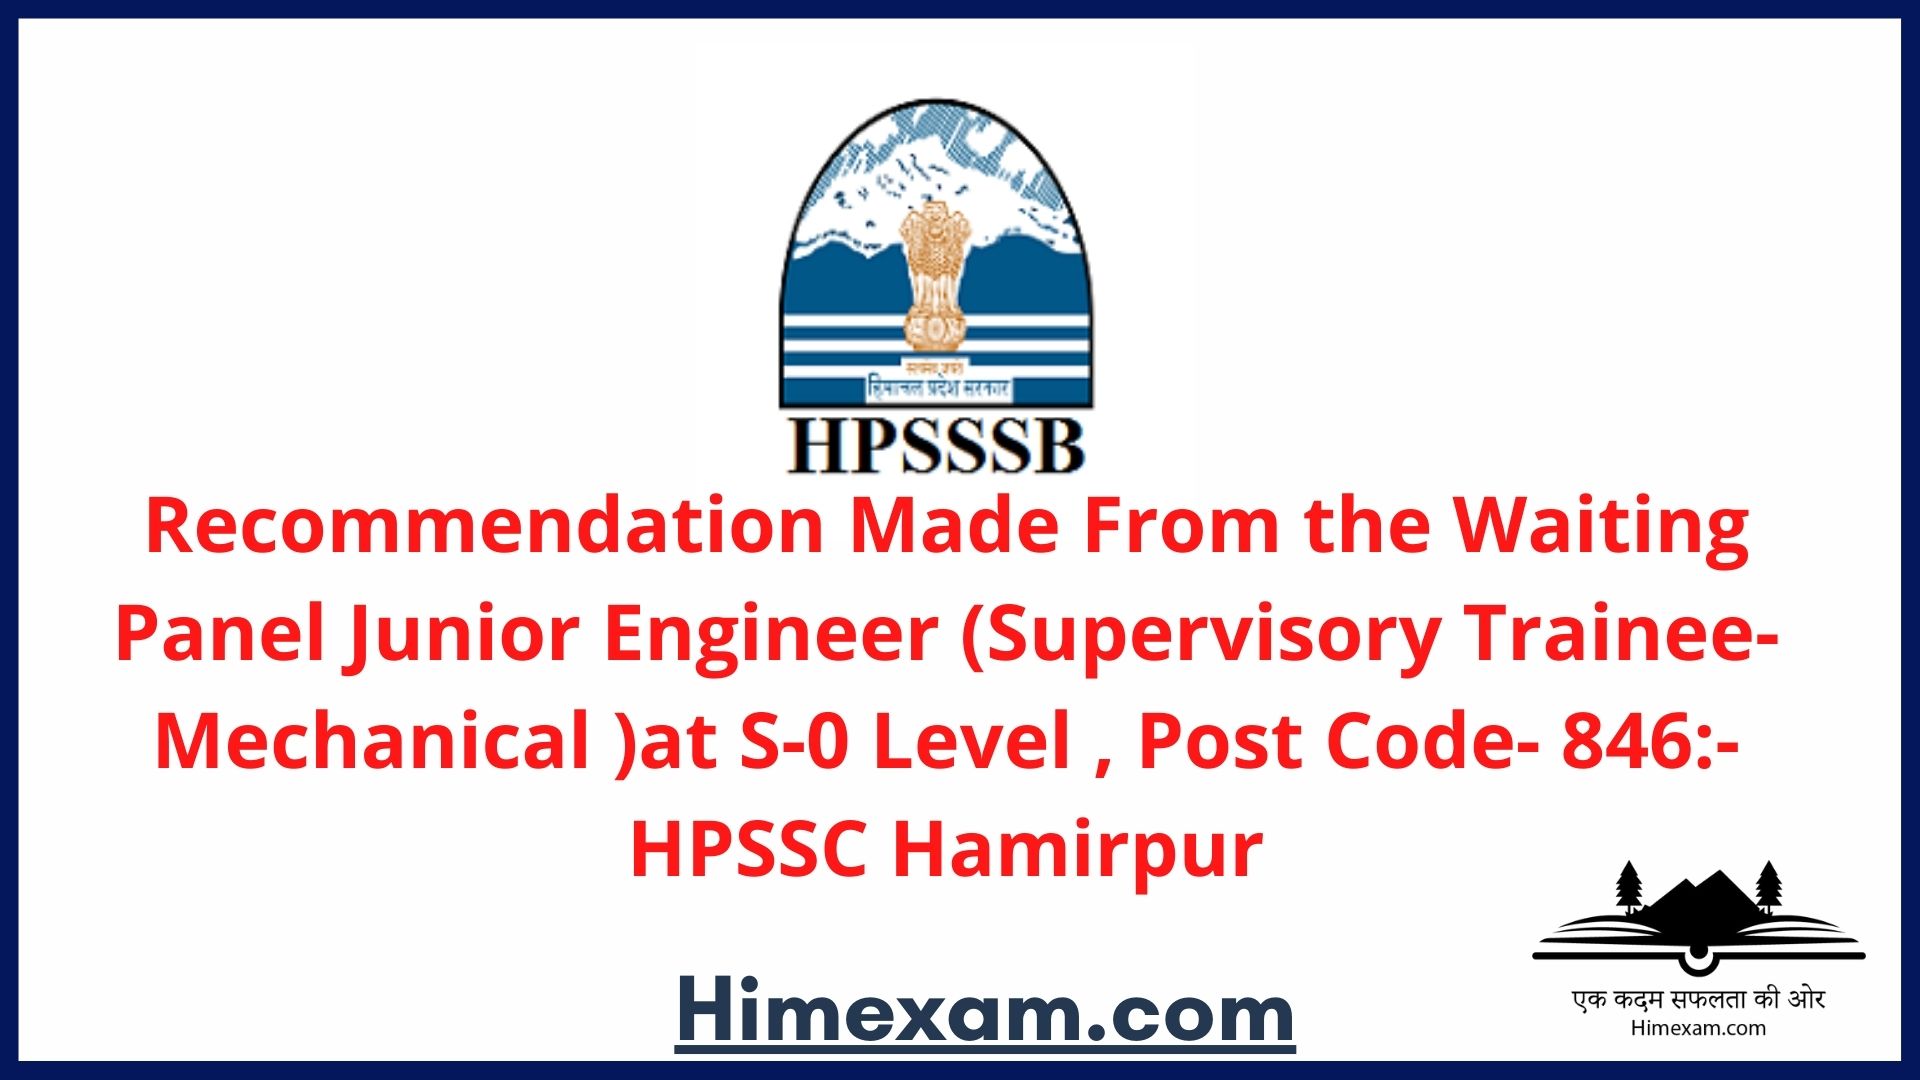 Recommendation Made From the Waiting Panel  Junior Engineer (Supervisory Trainee-Mechanical )at S-0 Level , Post Code- 846:- HPSSC Hamirpur